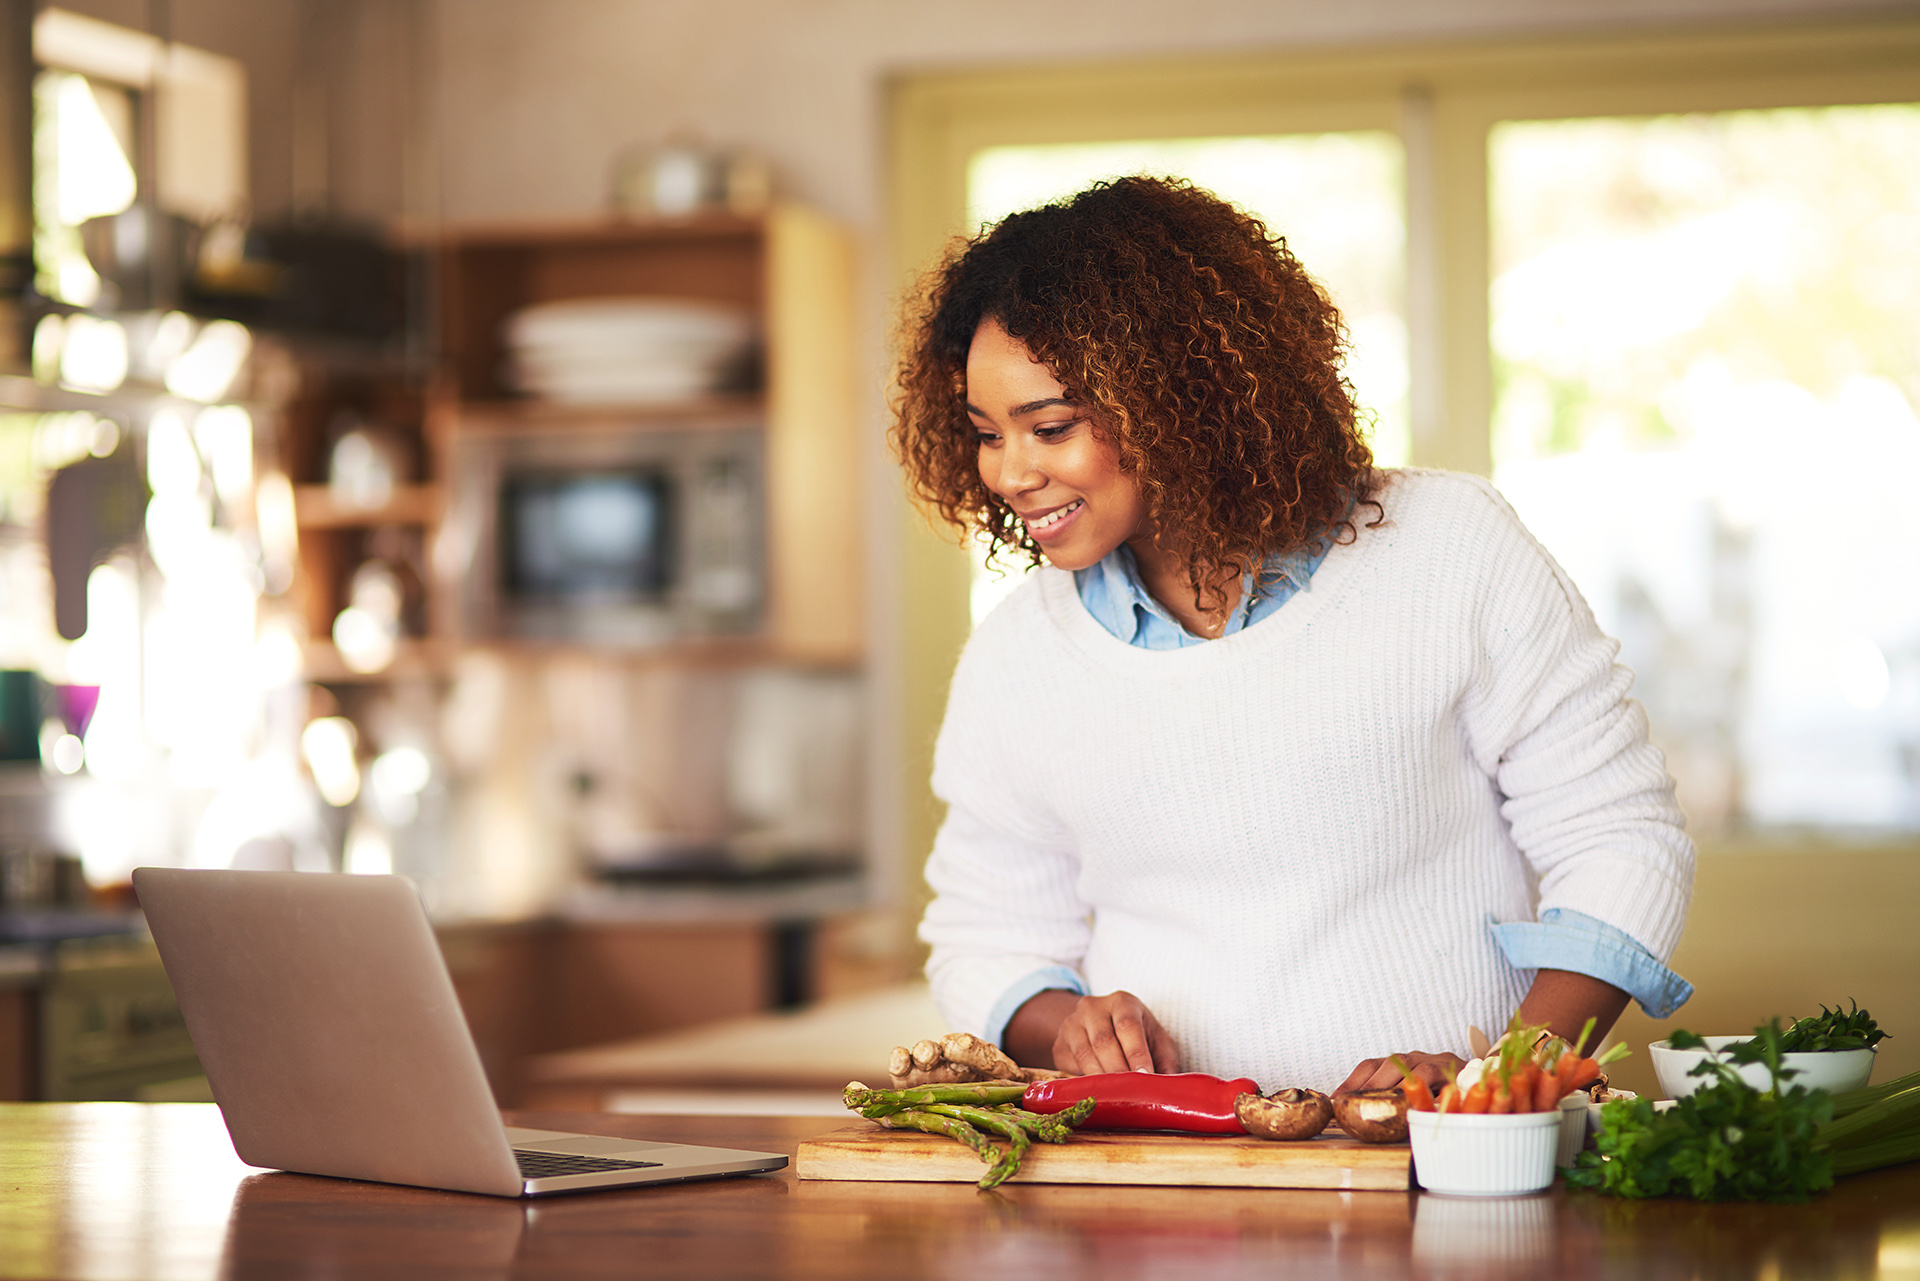 Meal planning is a breeze with modern technology. Shot of a young woman using a laptop while preparing a healthy meal at home